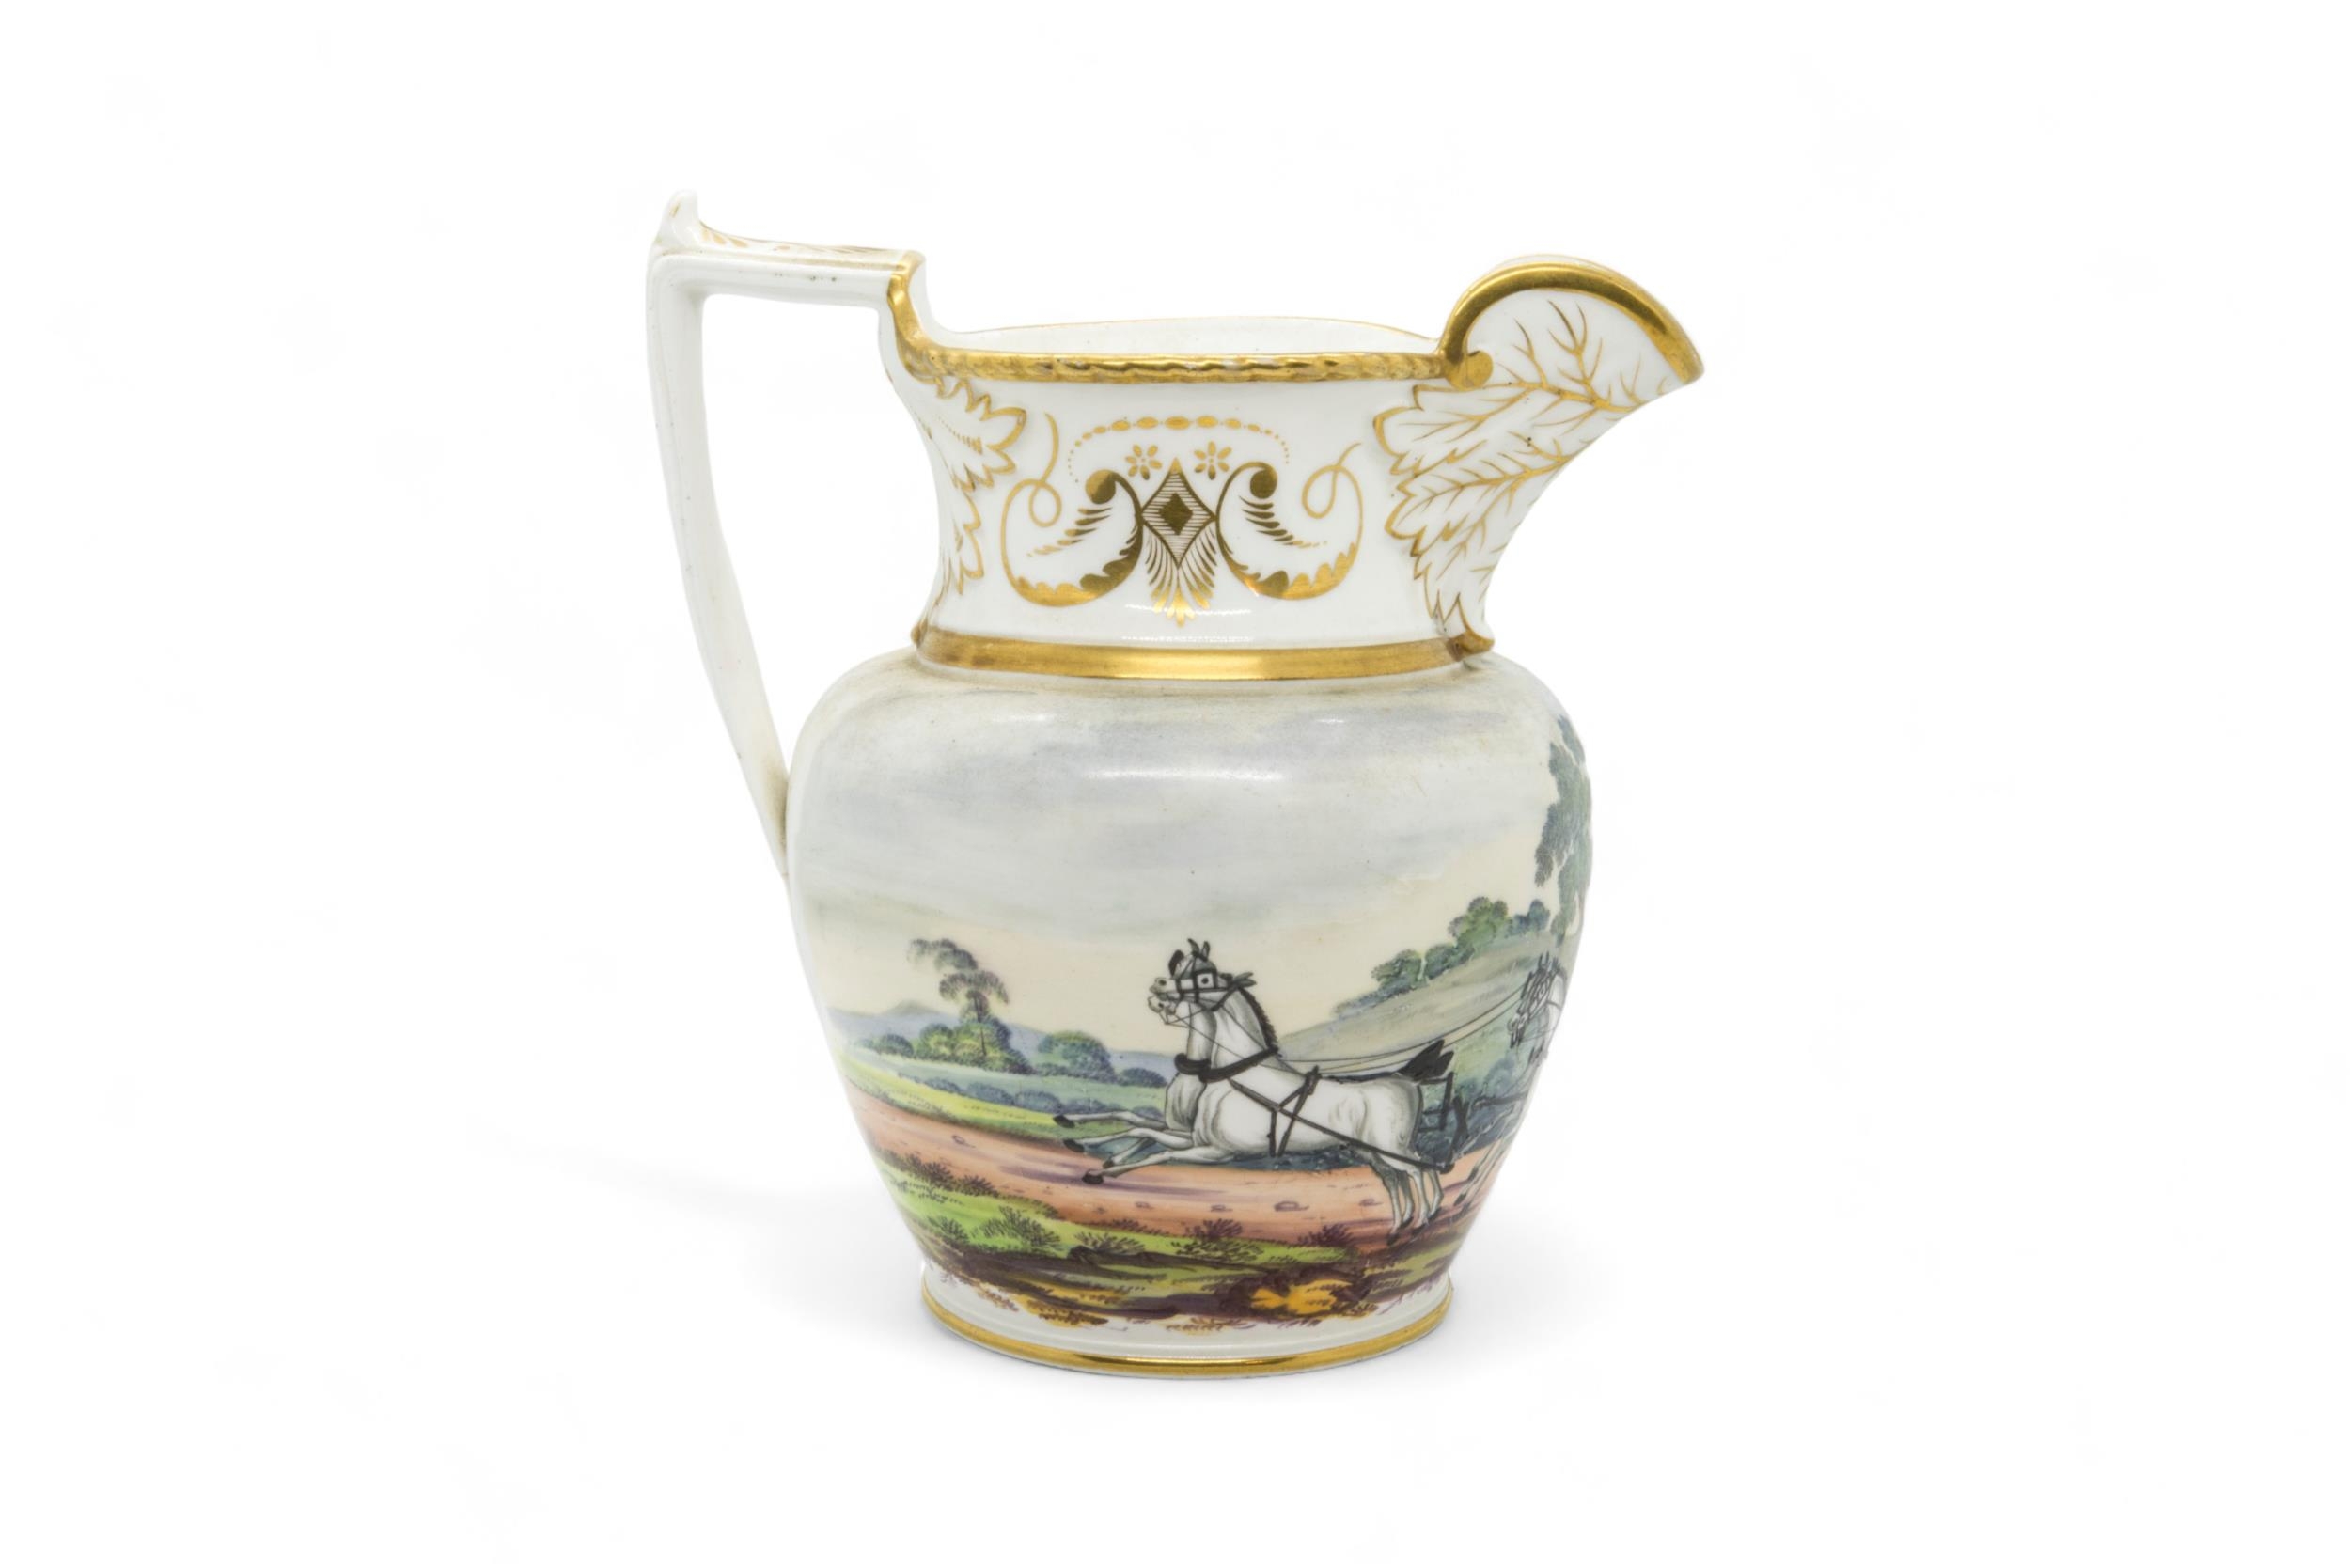 AN EARLY 19TH CENTURY COACHING JUG With gilded monogram, 20cms high - Image 3 of 4